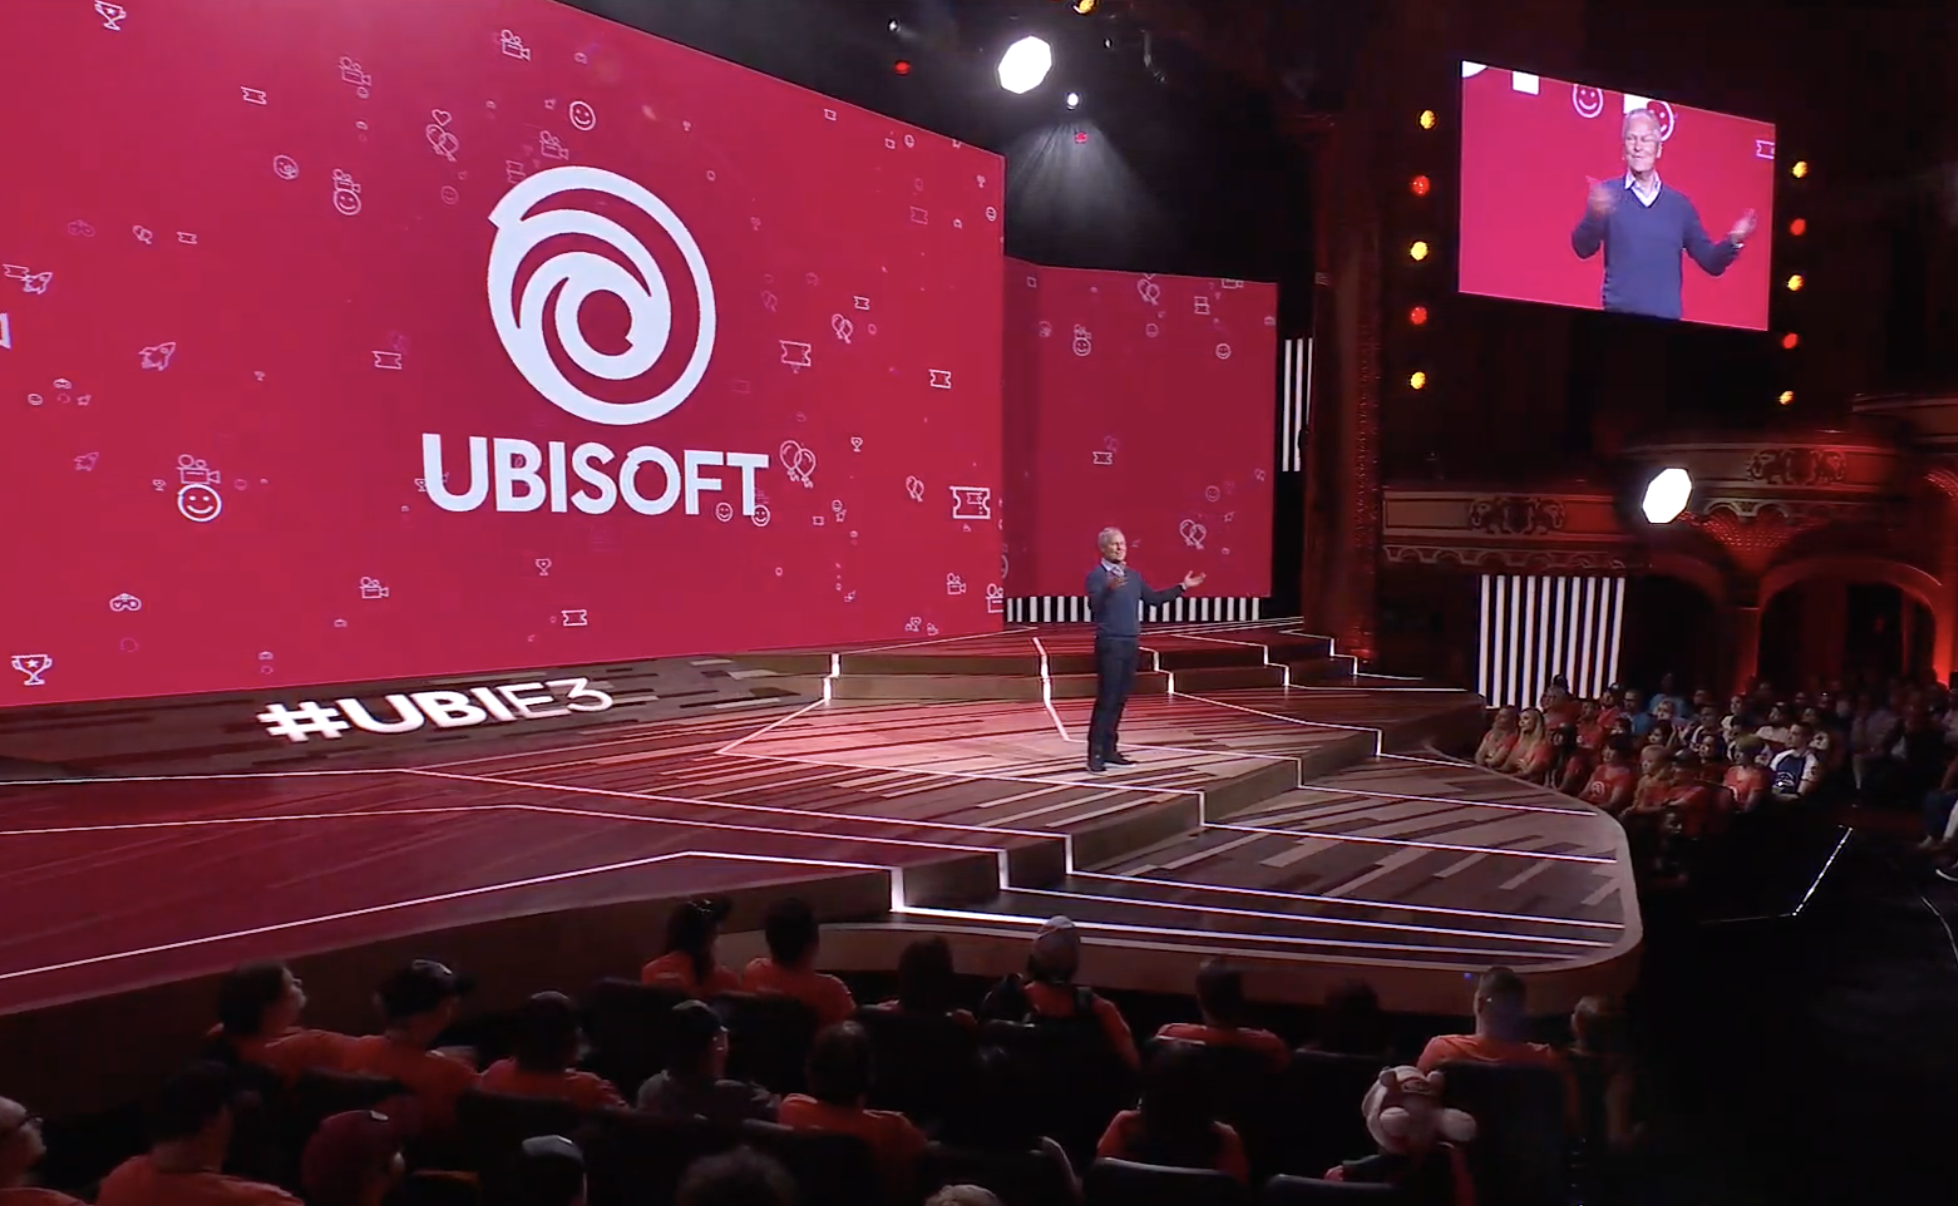 Here are the trailers from Ubisoft's E3 press conference | TechCrunch